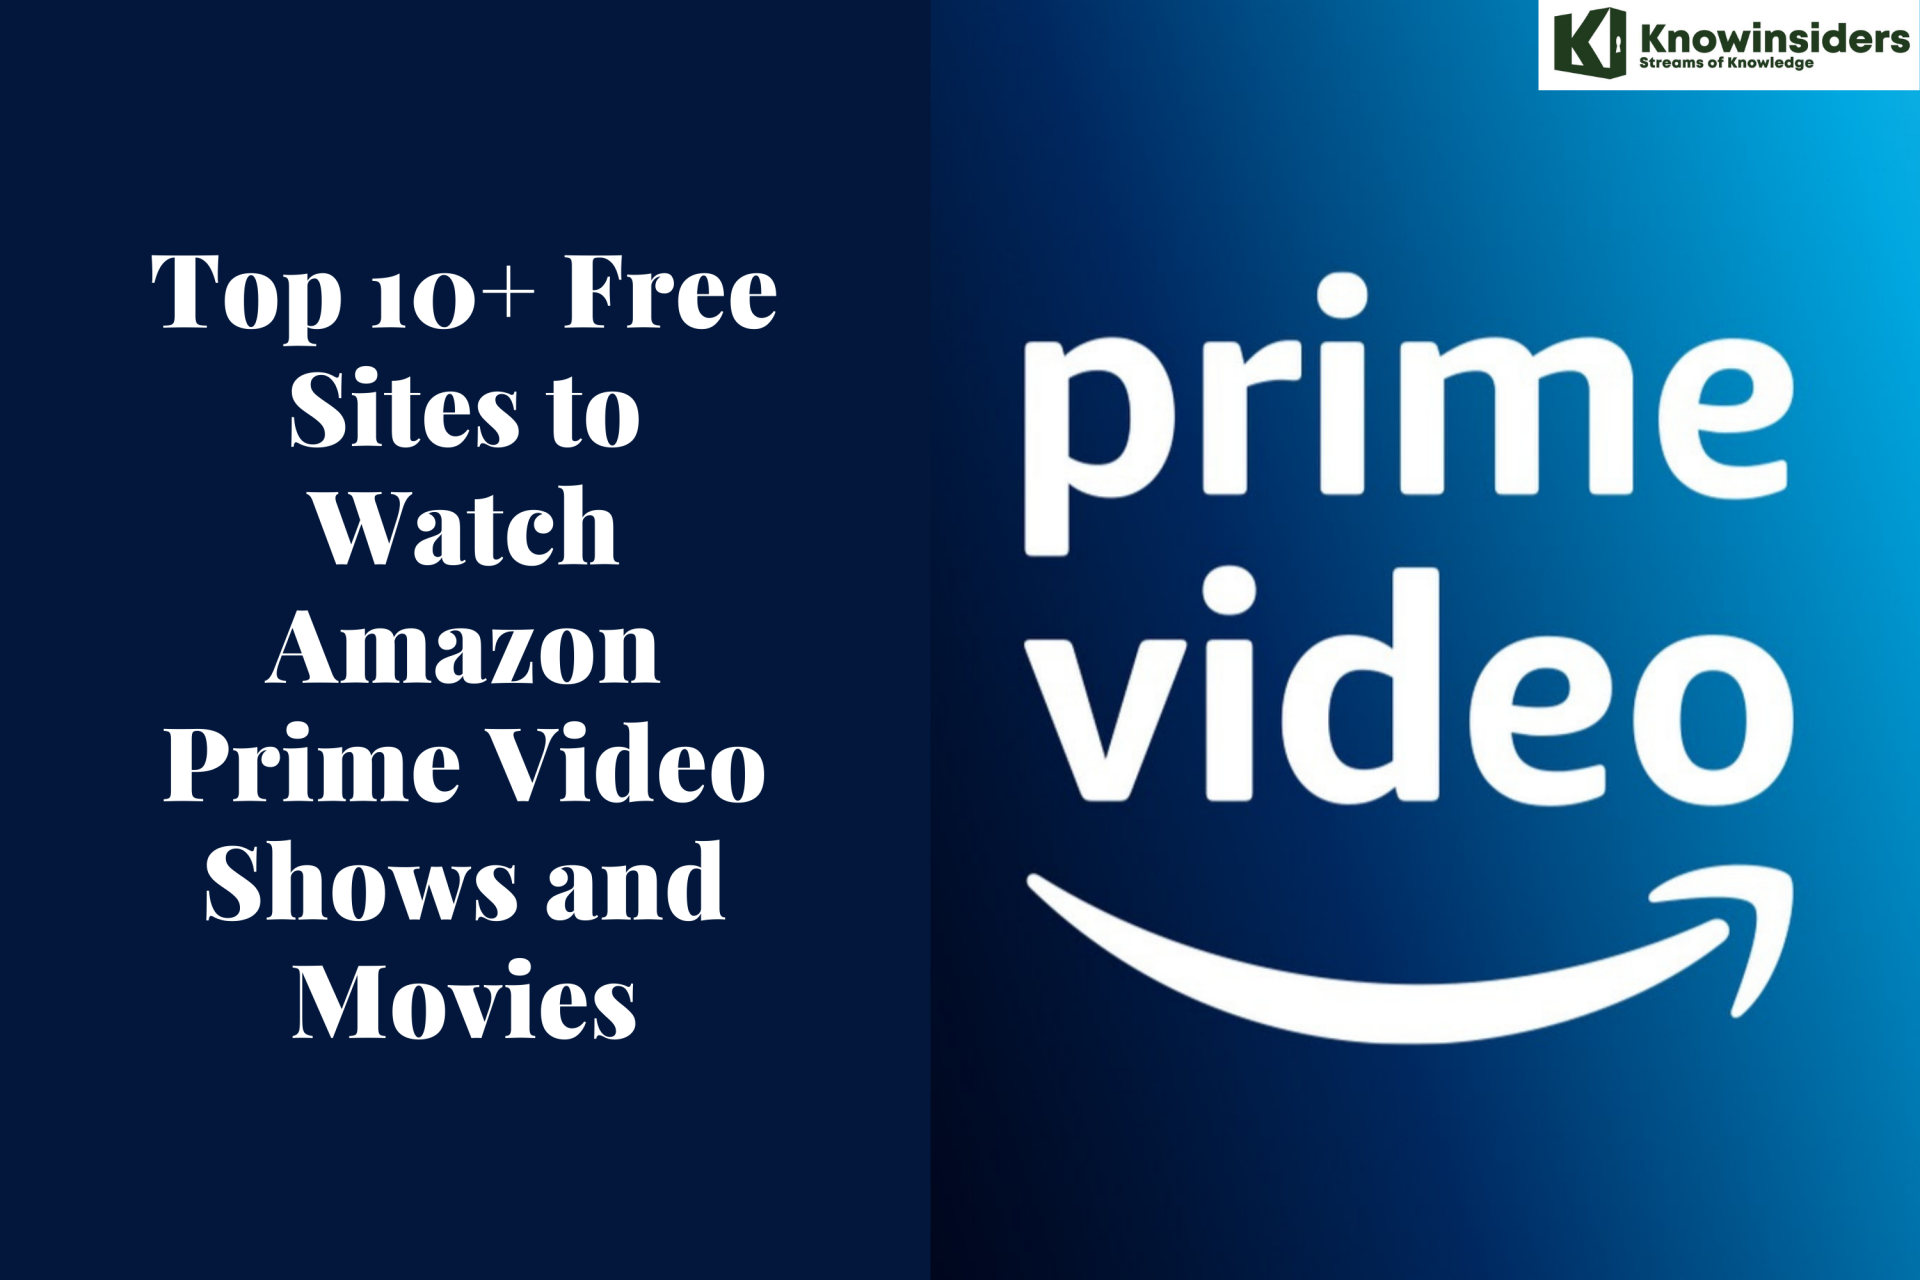 Top 10+ Free Sites to Watch Amazon Prime Video Shows and Movies